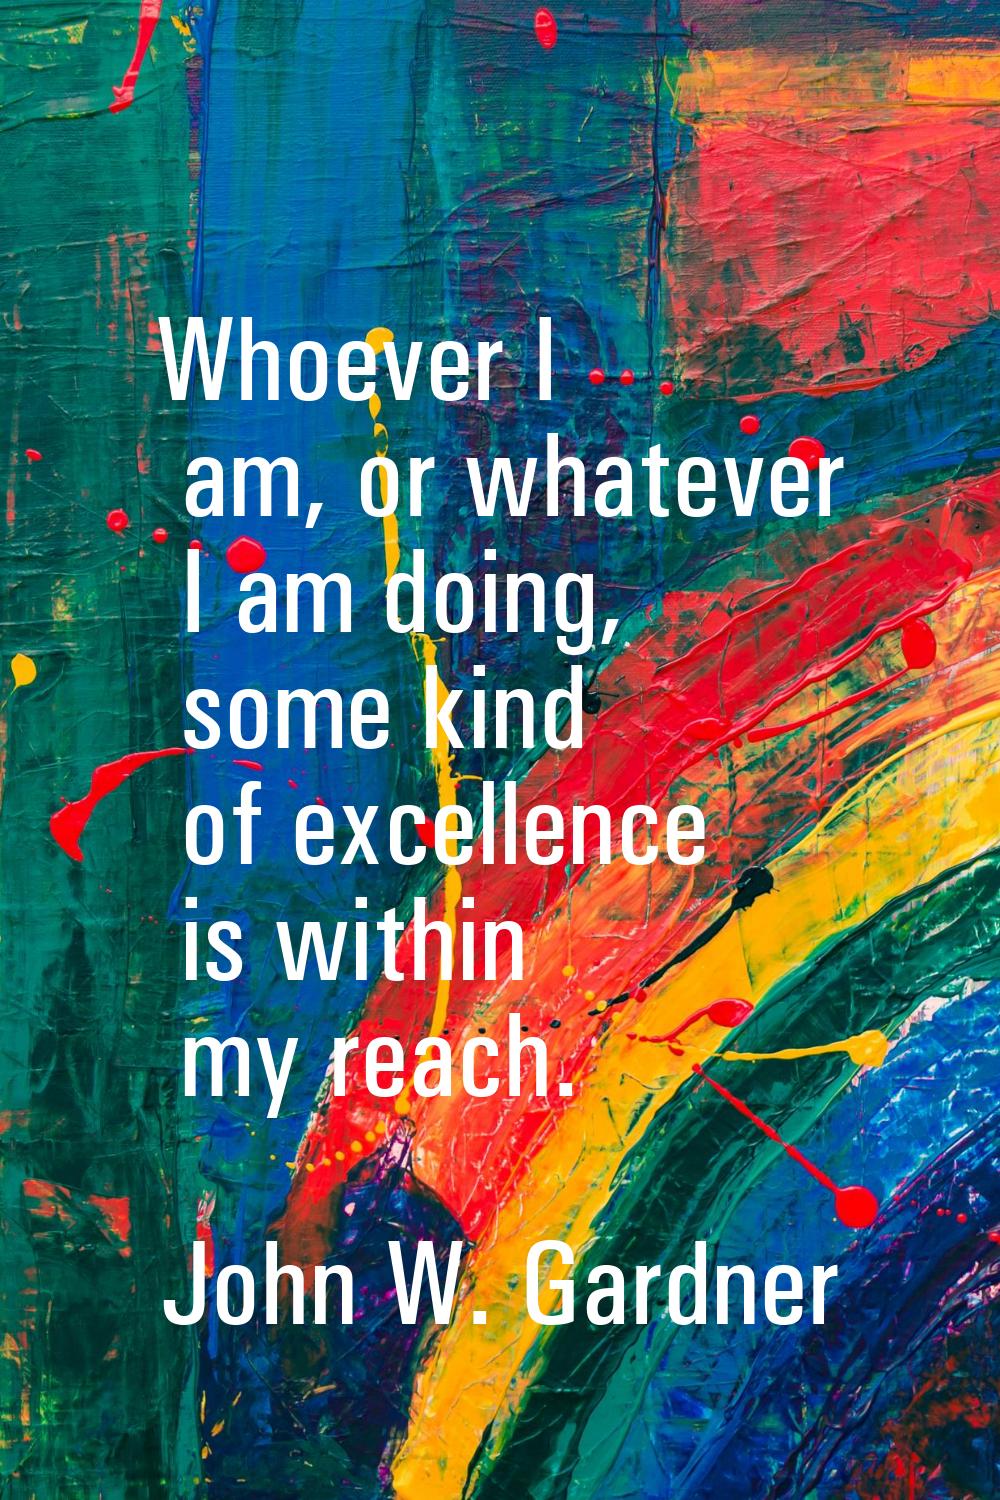 Whoever I am, or whatever I am doing, some kind of excellence is within my reach.